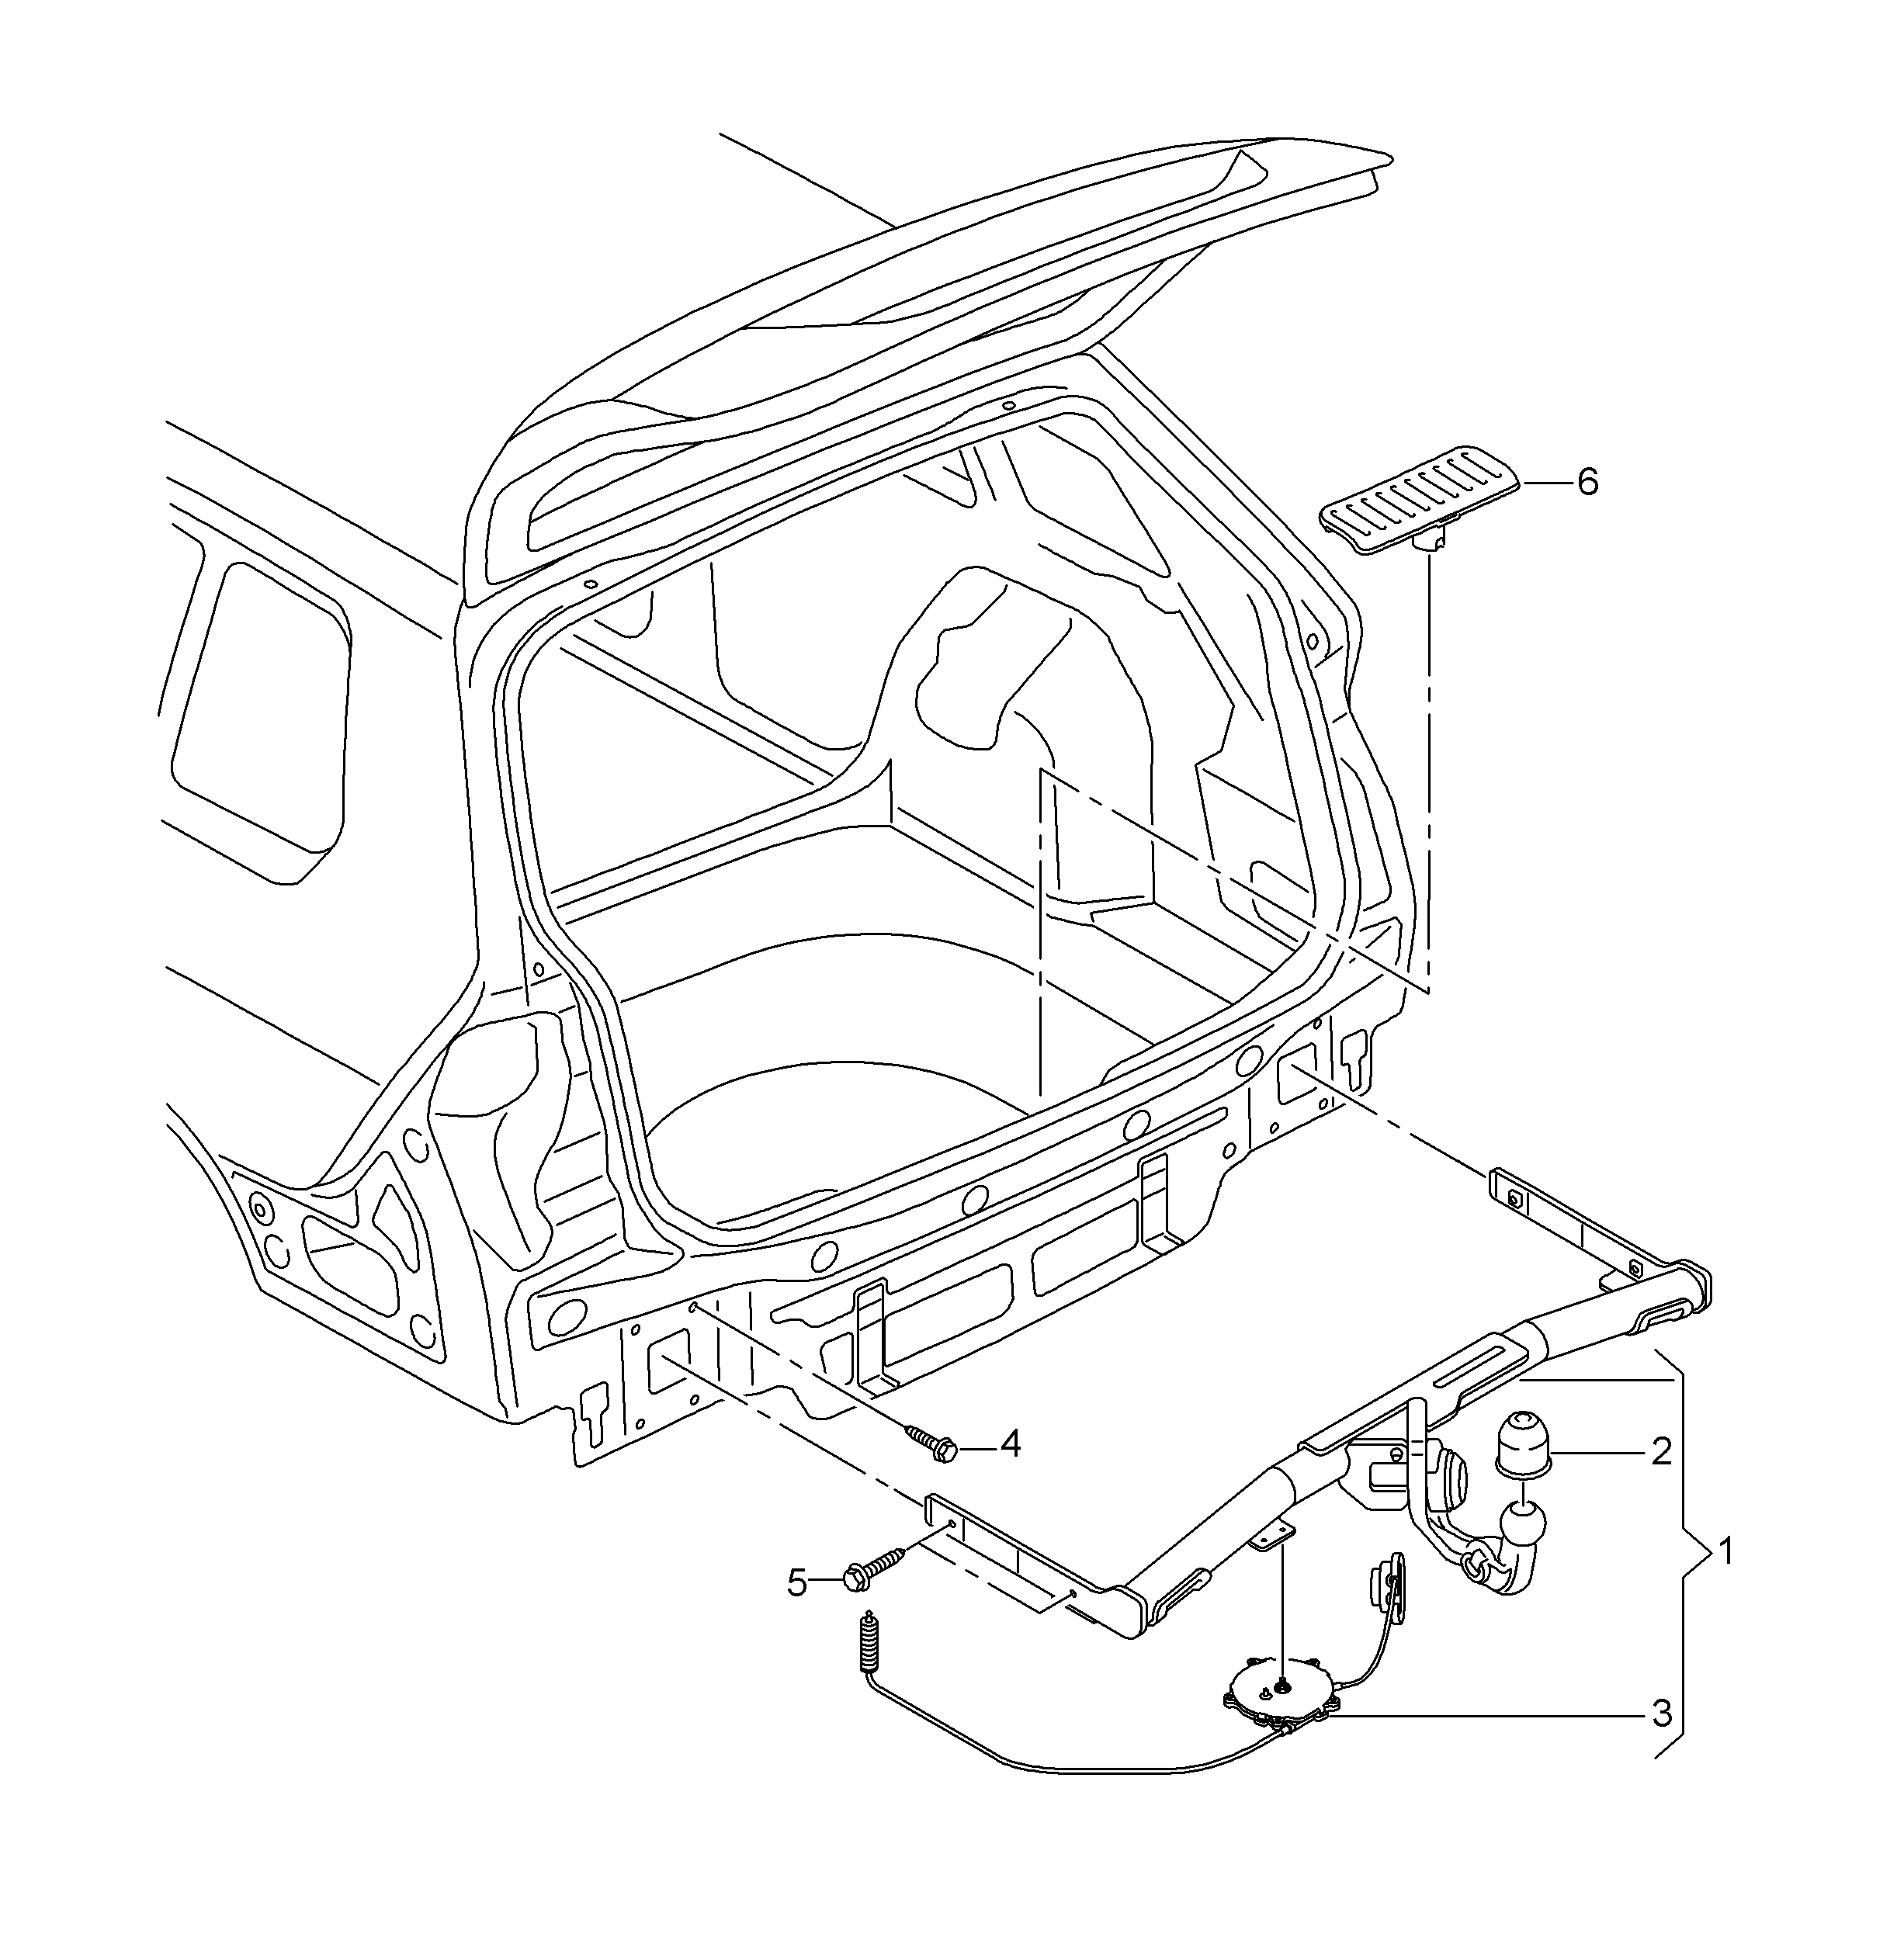 Tow hitch,<br>swivel-type  - Golf/Variant/4Motion - golf